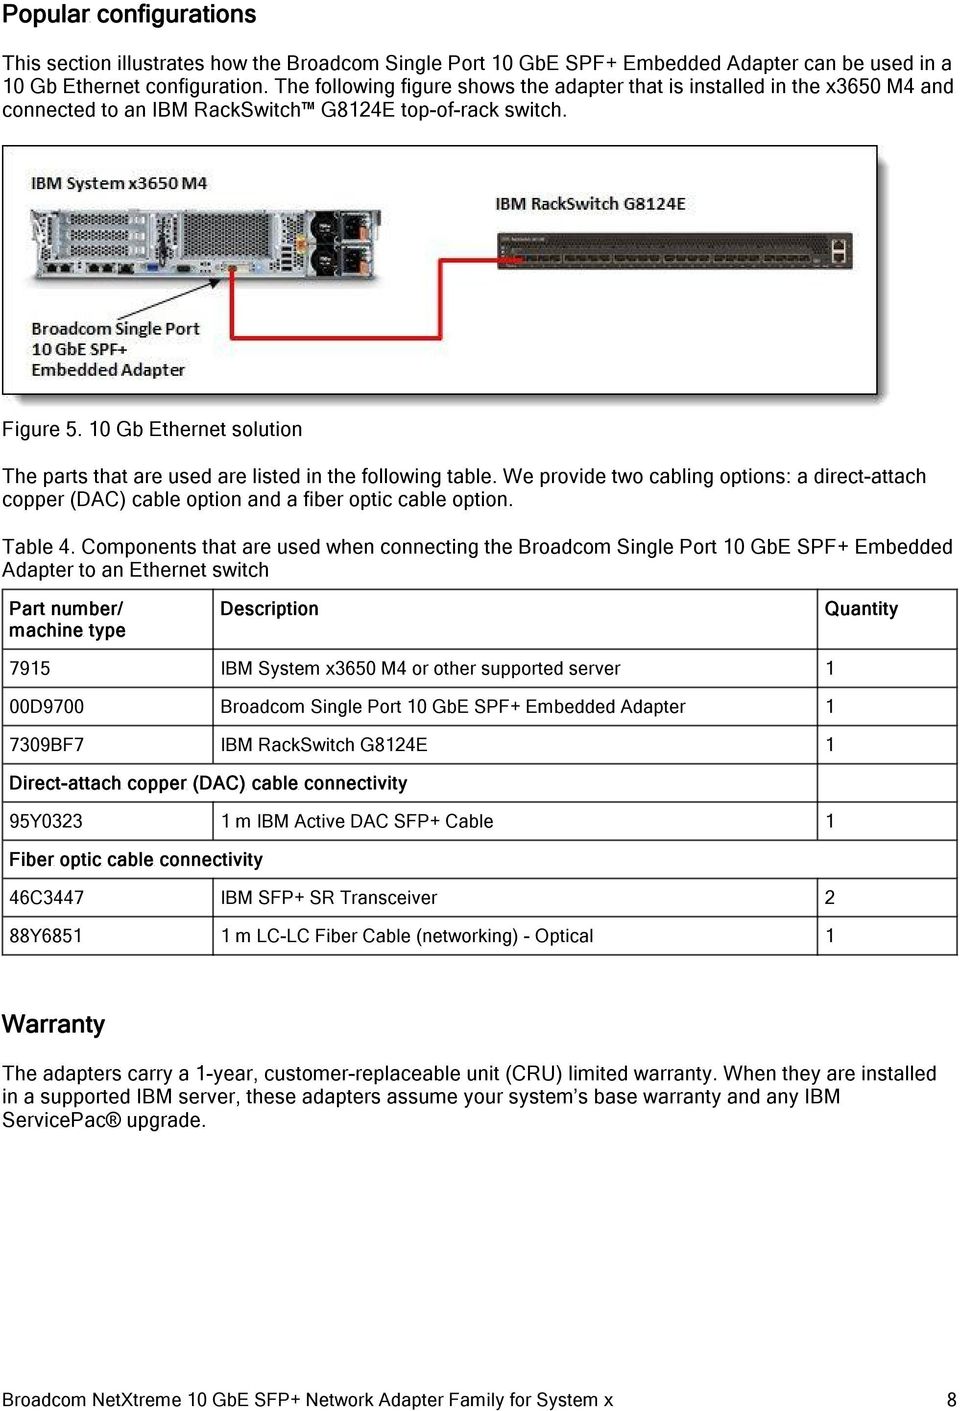 10 Gb Ethernet solution The parts that are used are listed in the following table. We provide two cabling options: a direct-attach copper (DAC) cable option and a fiber optic cable option. Table 4.